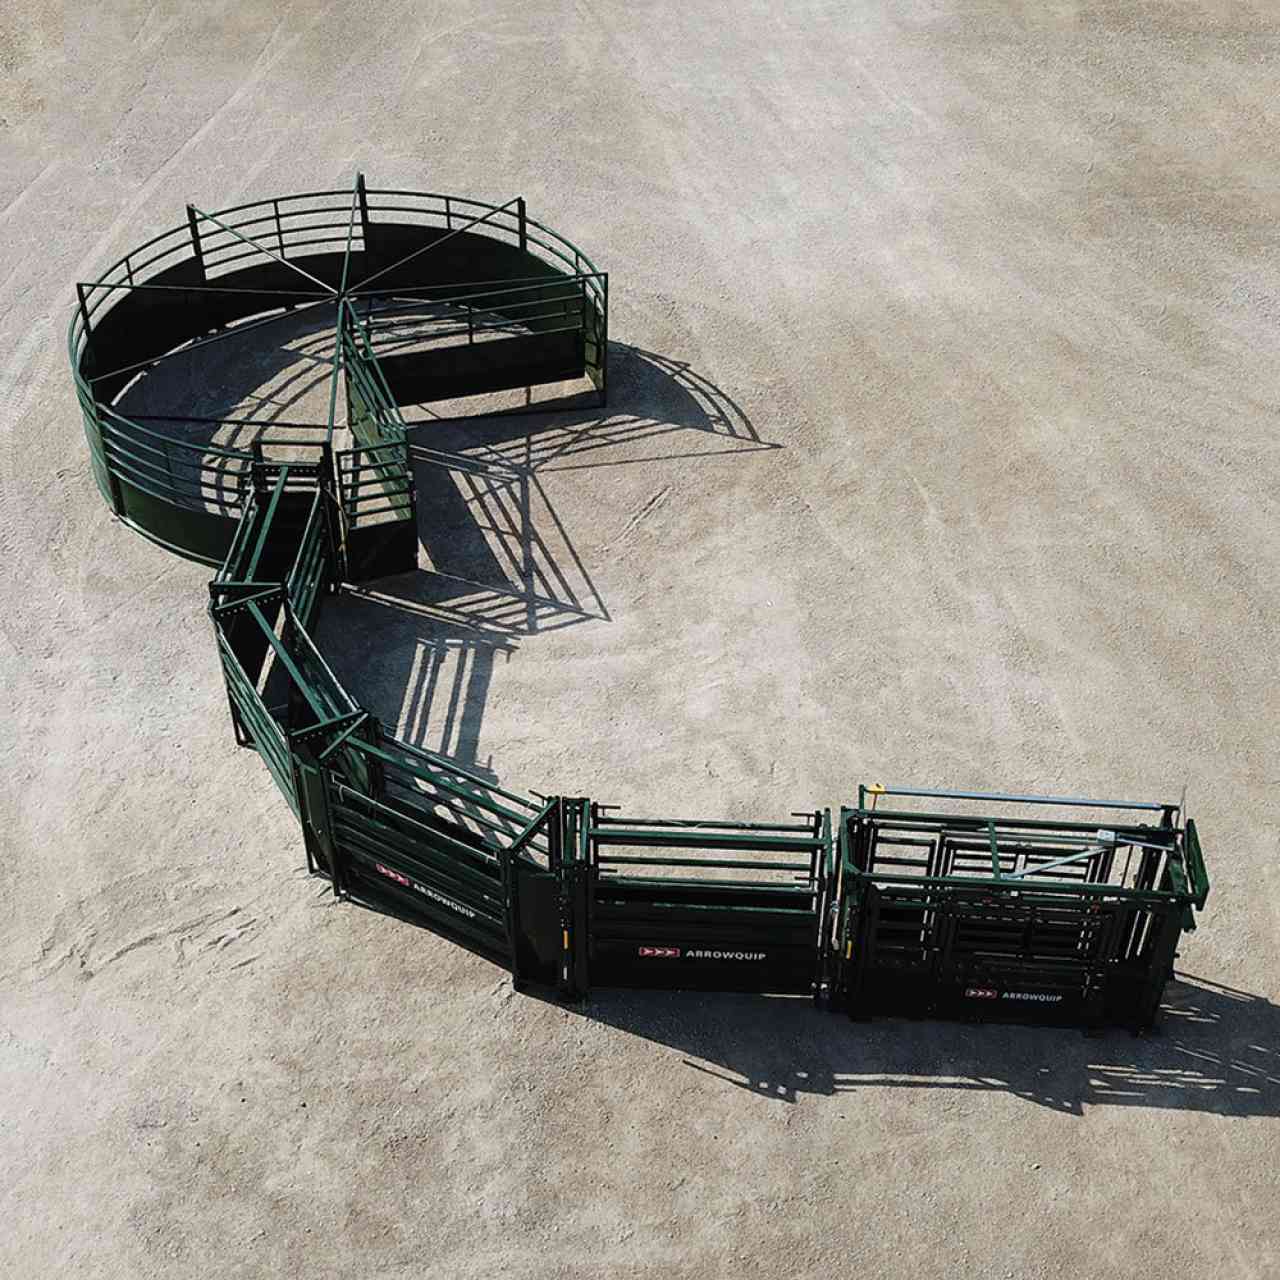 S-Flow Cattle Working System with 90 degree curved alley